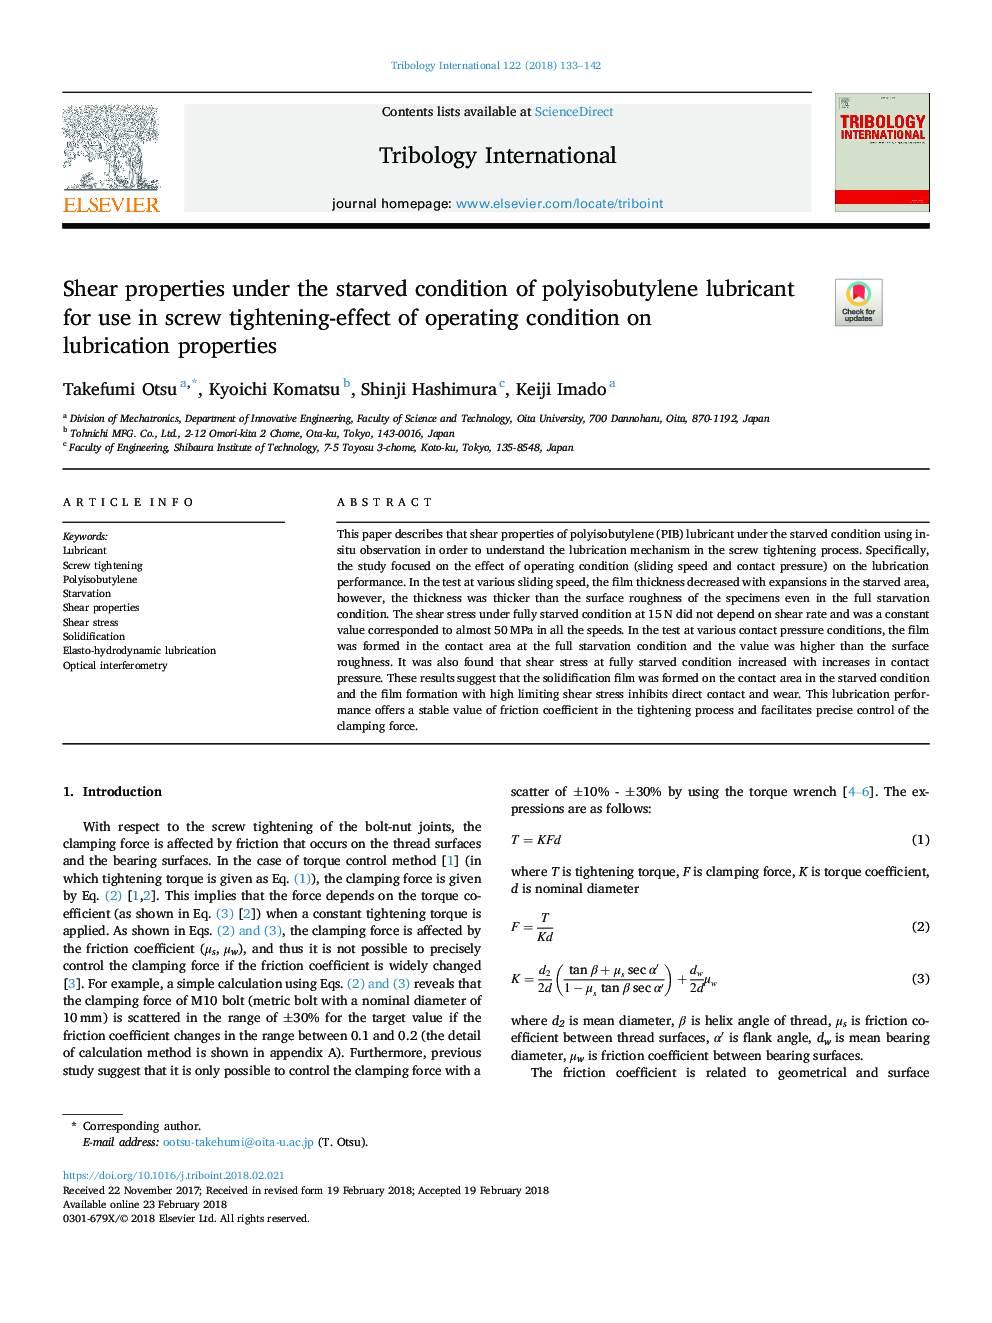 Shear properties under the starved condition of polyisobutylene lubricant for use in screw tightening-effect of operating condition on lubrication properties